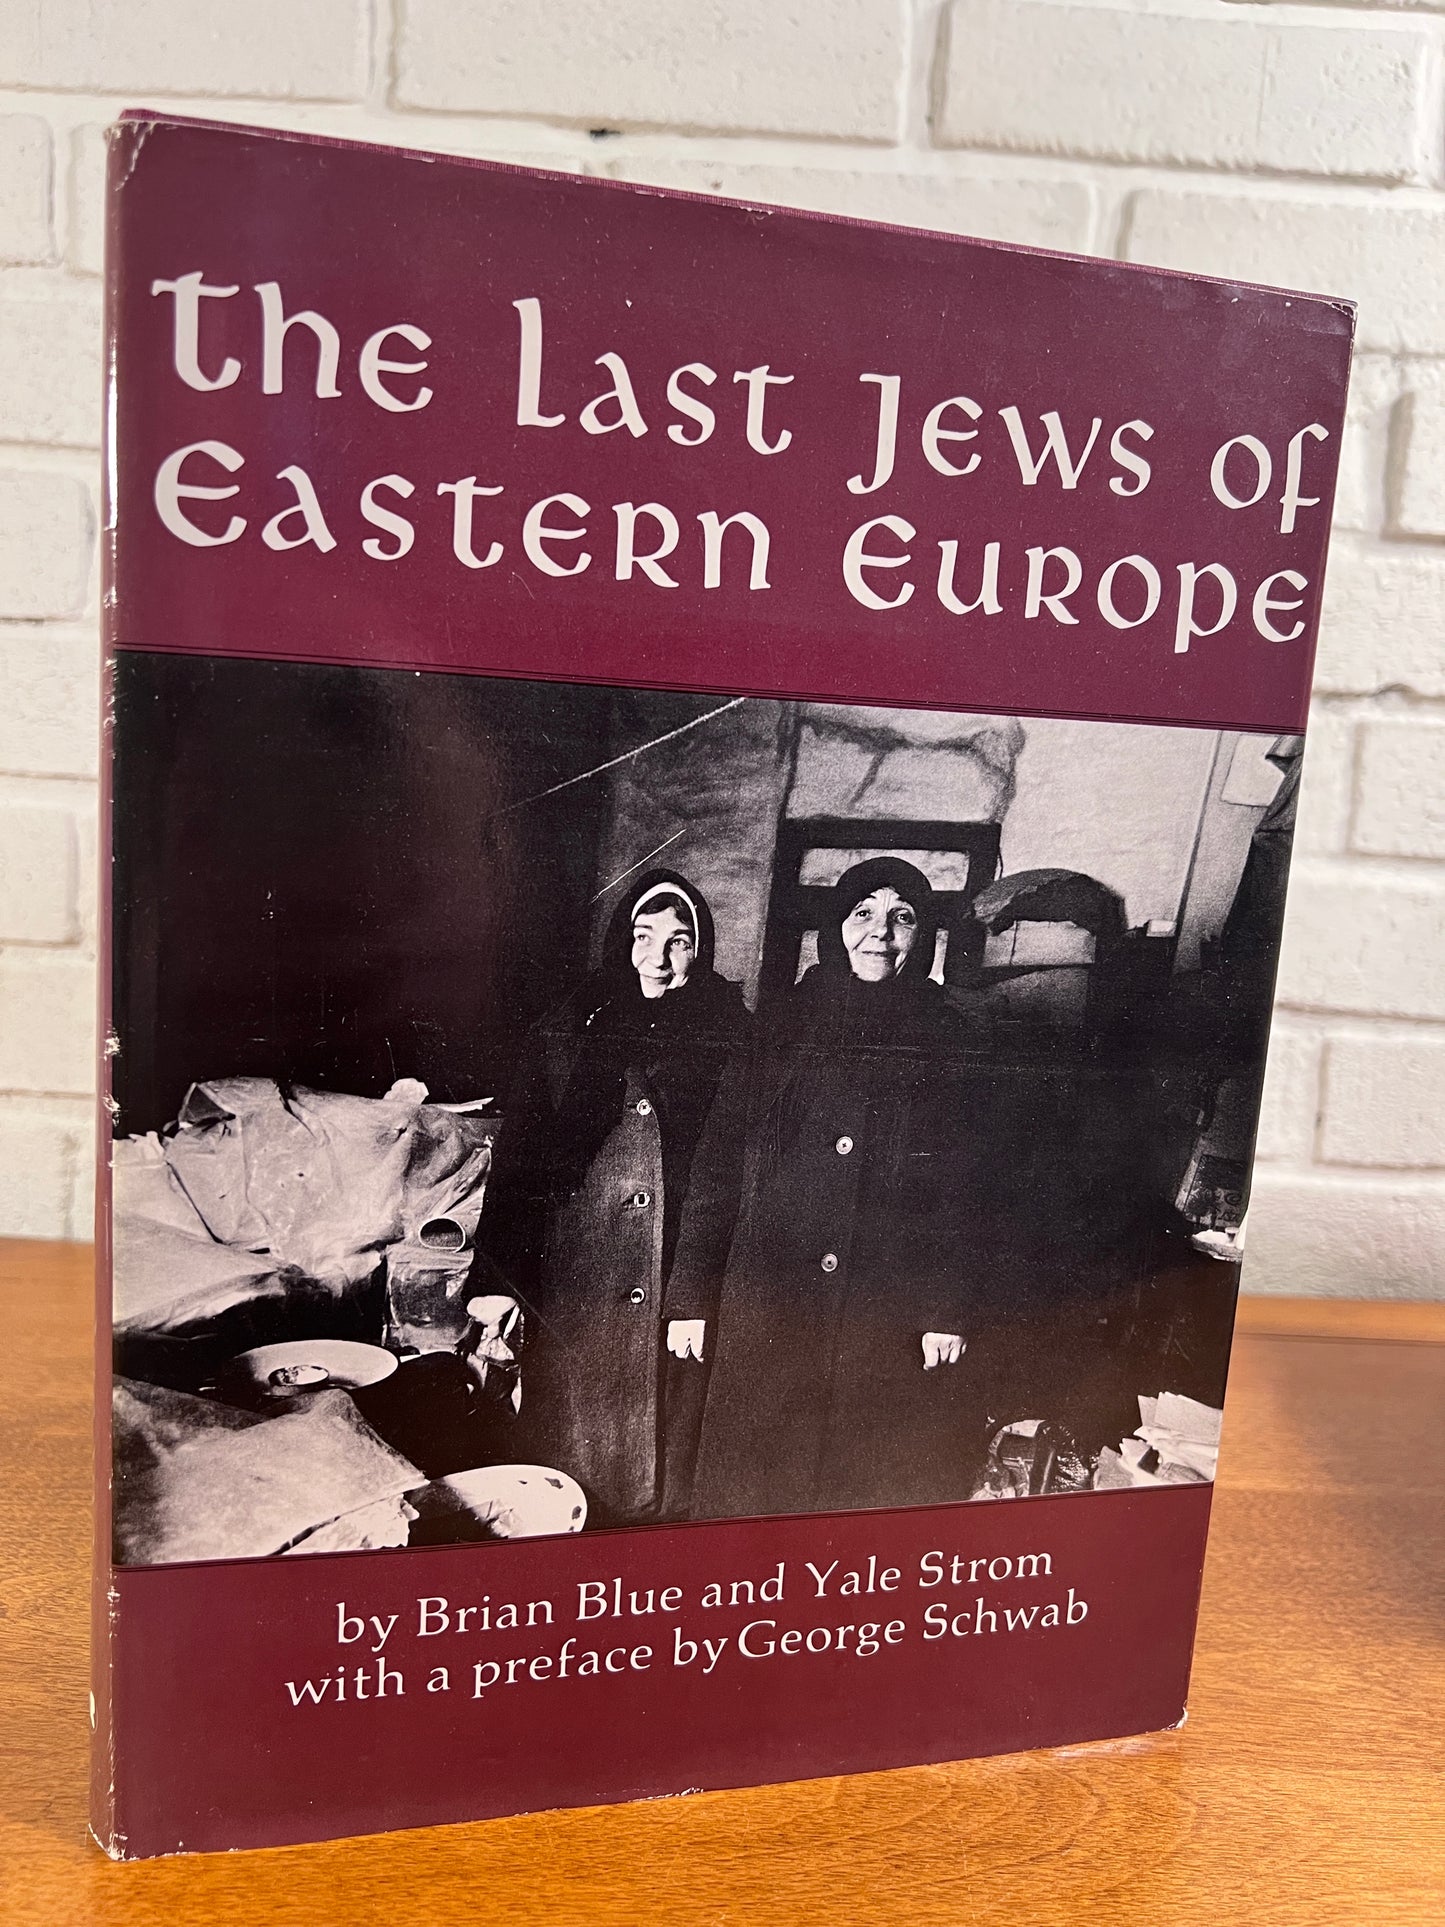 The Last Jews of Eastern Europe by Brian Blue and Yale Strom